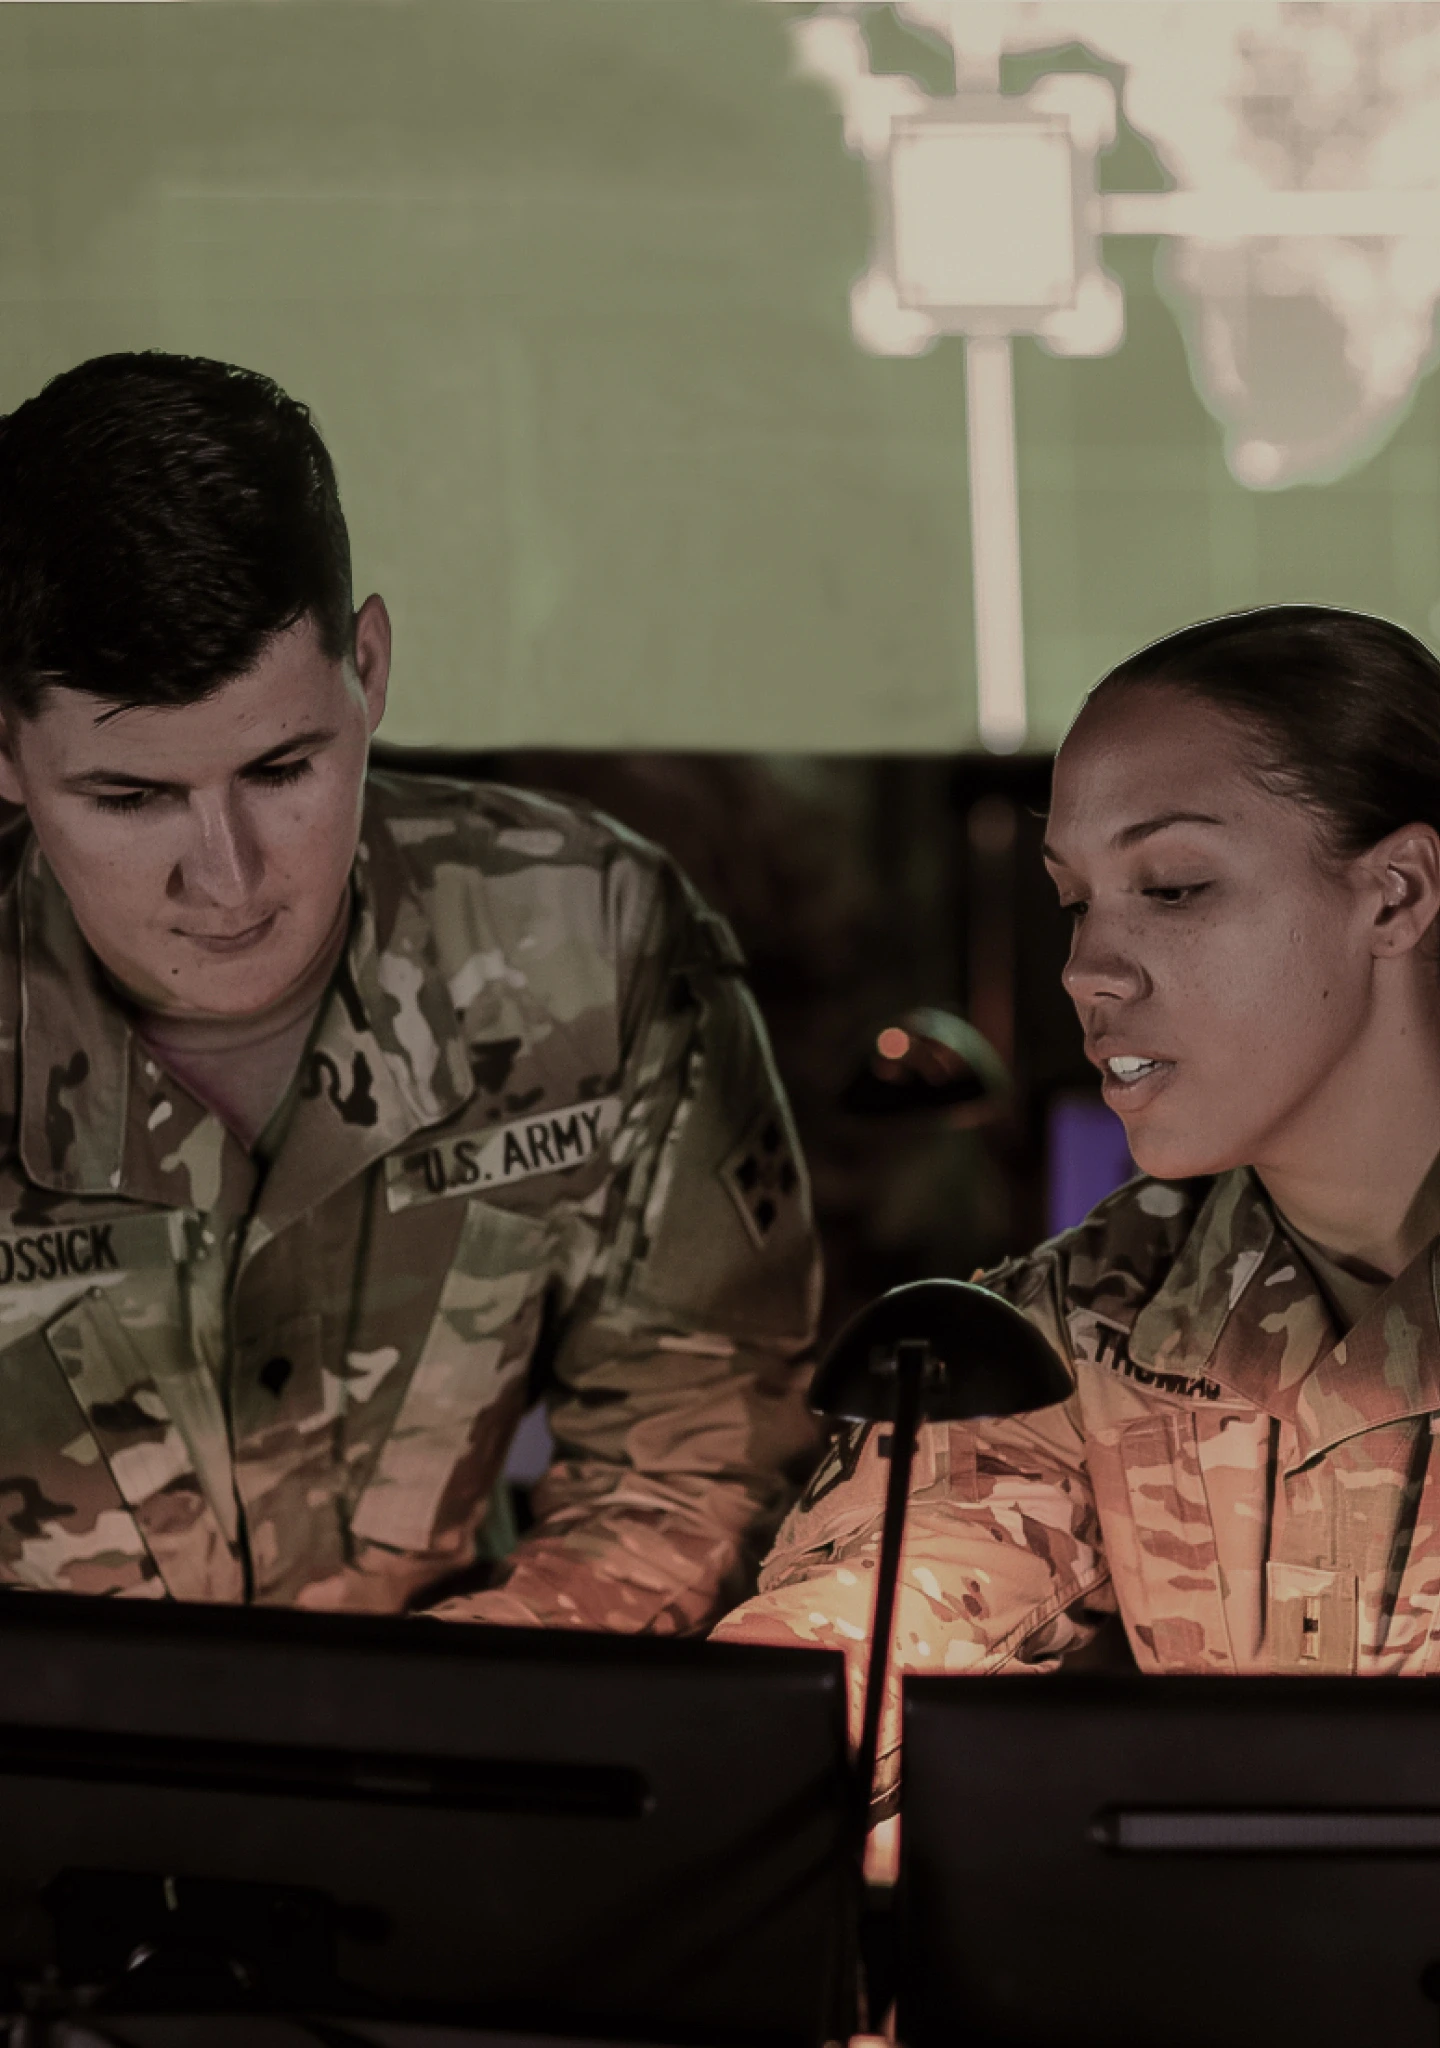 Two Soldiers in combat uniform working at a computer